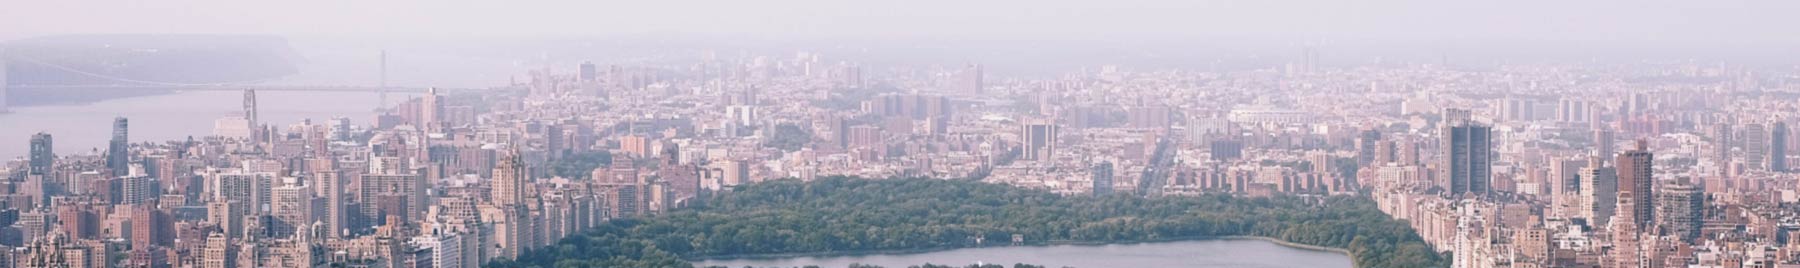 An aerial view of central park and the skyline of New York City